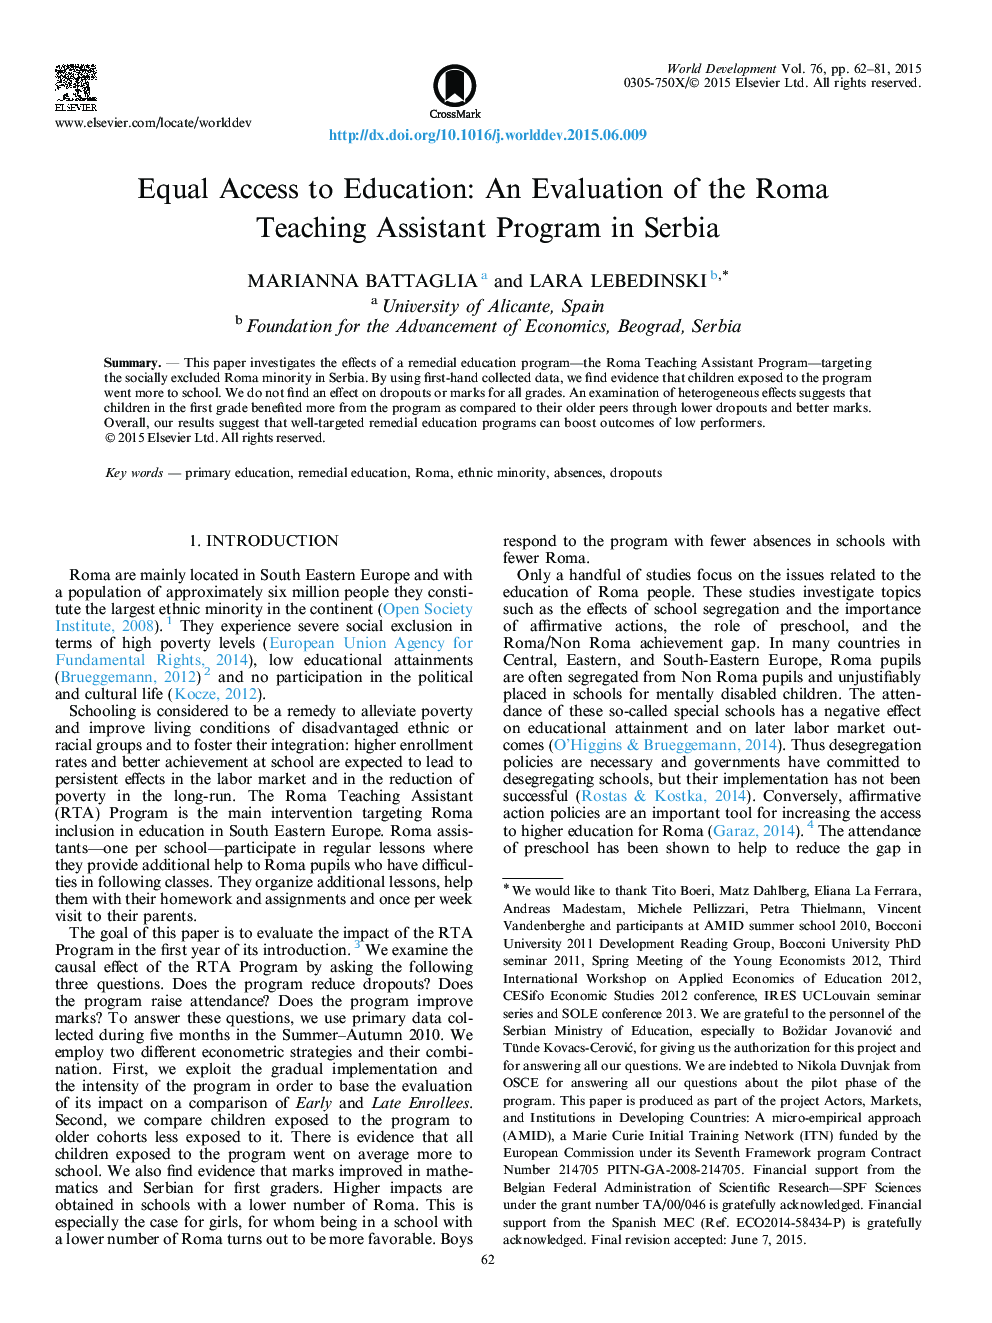 Equal Access to Education: An Evaluation of the Roma Teaching Assistant Program in Serbia